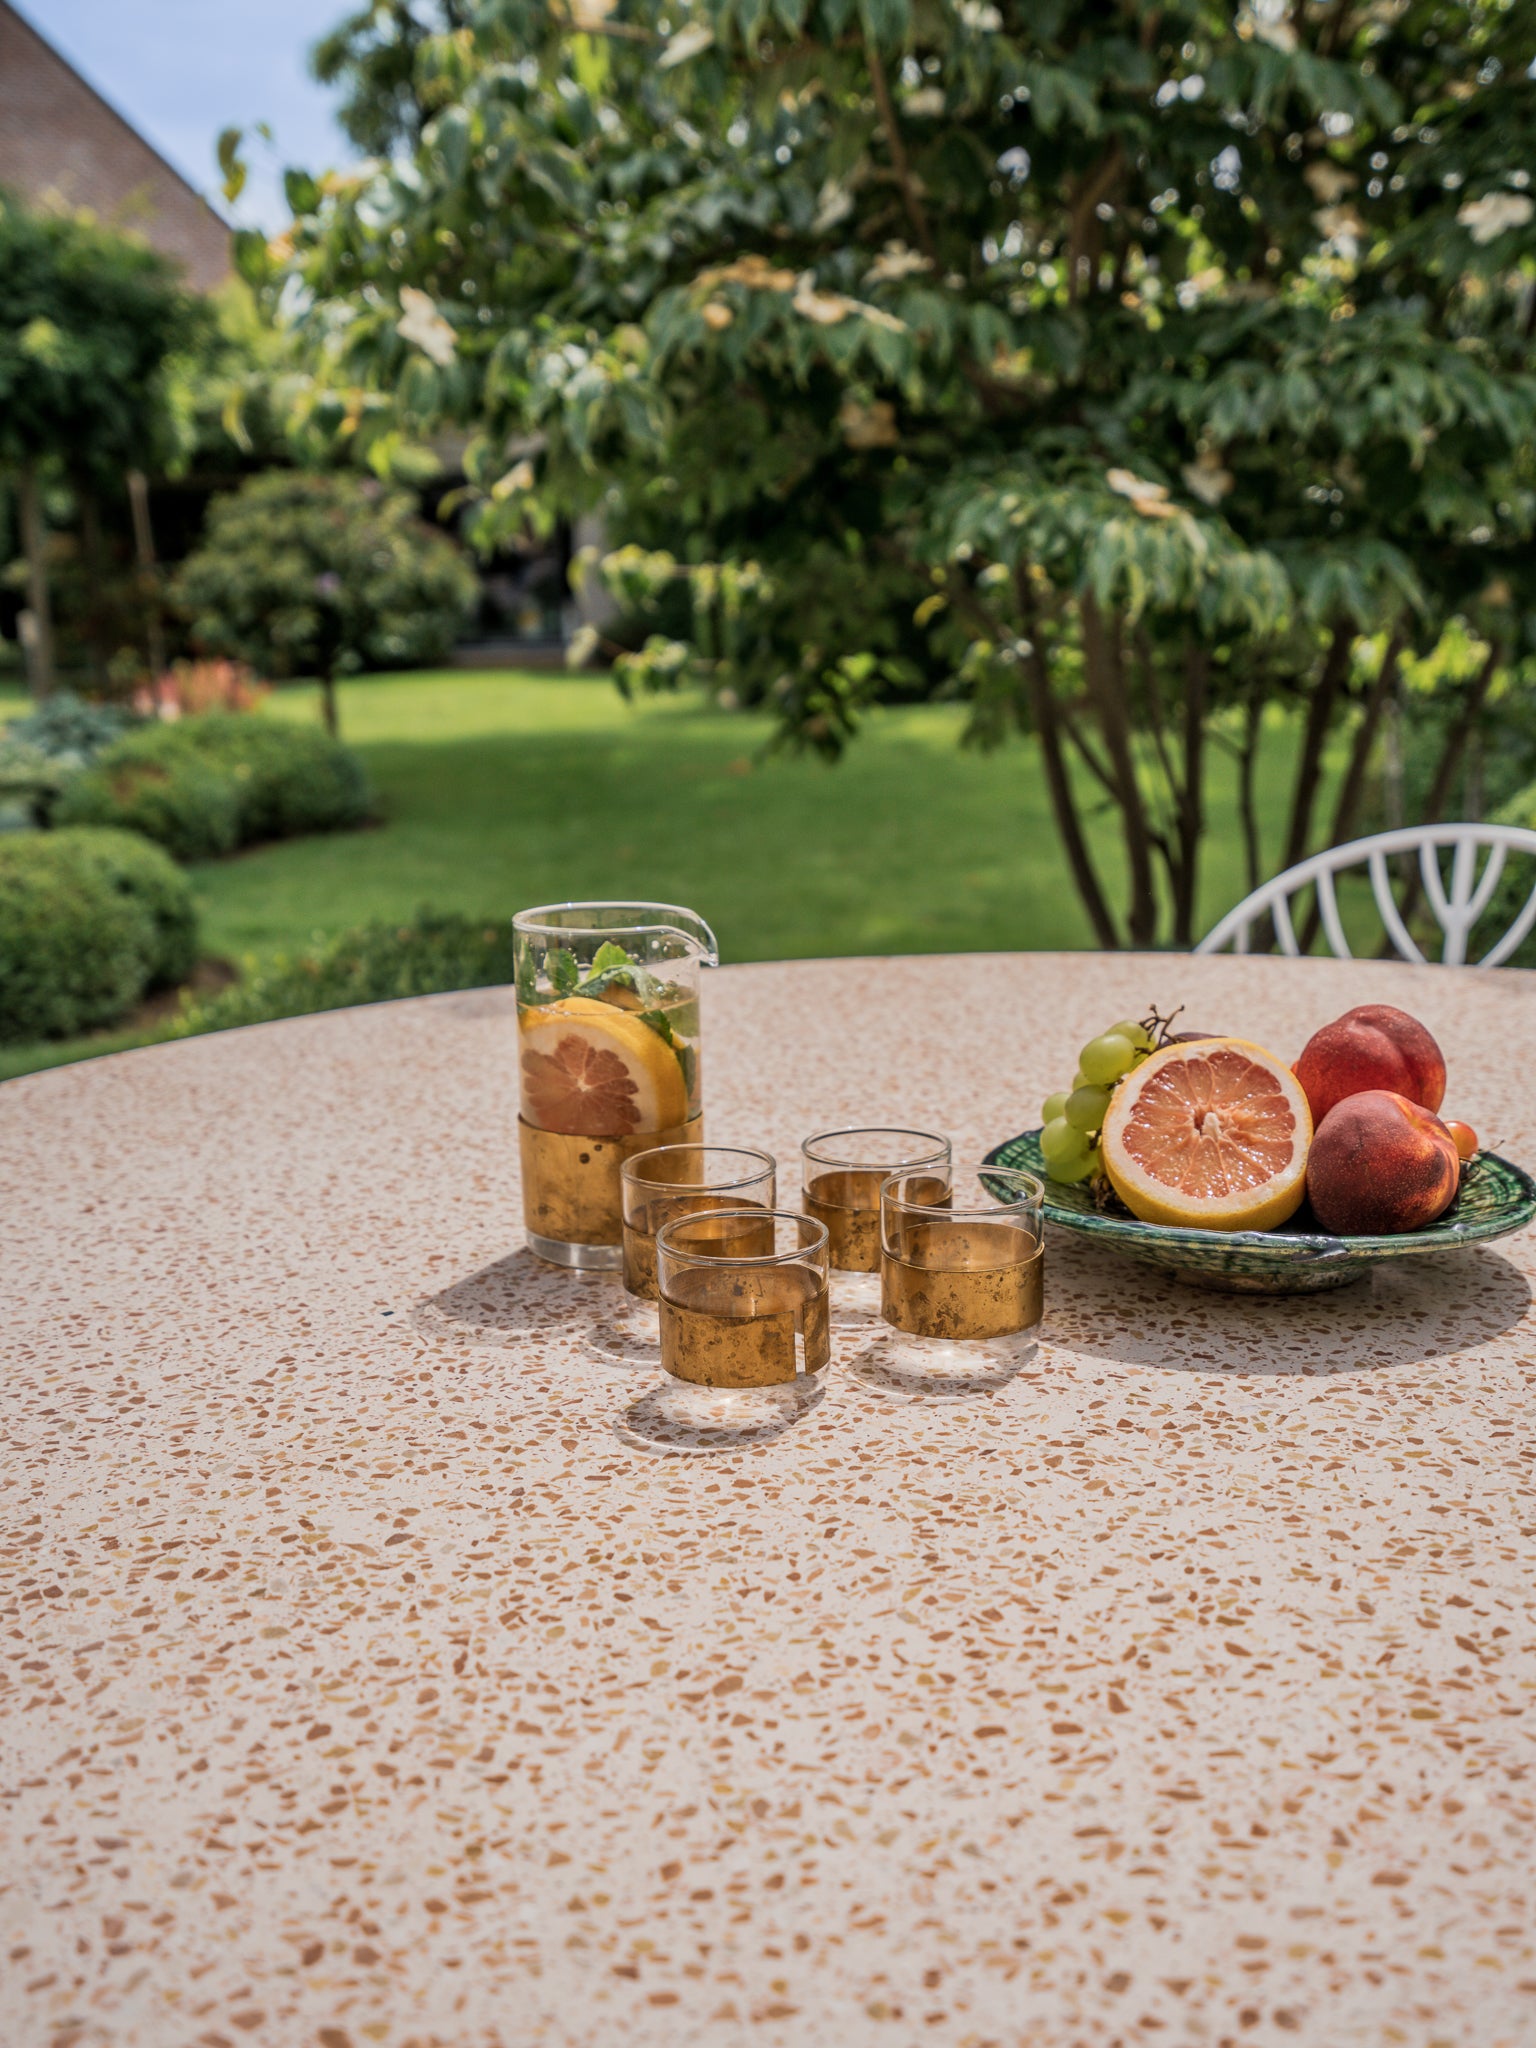 This terrazzo outdoor table is unique because it is available in many colours and stones. Your imagination is the limit. 
It is a very interesting material to work with because of the combinations you can make with colors from surrounding materials